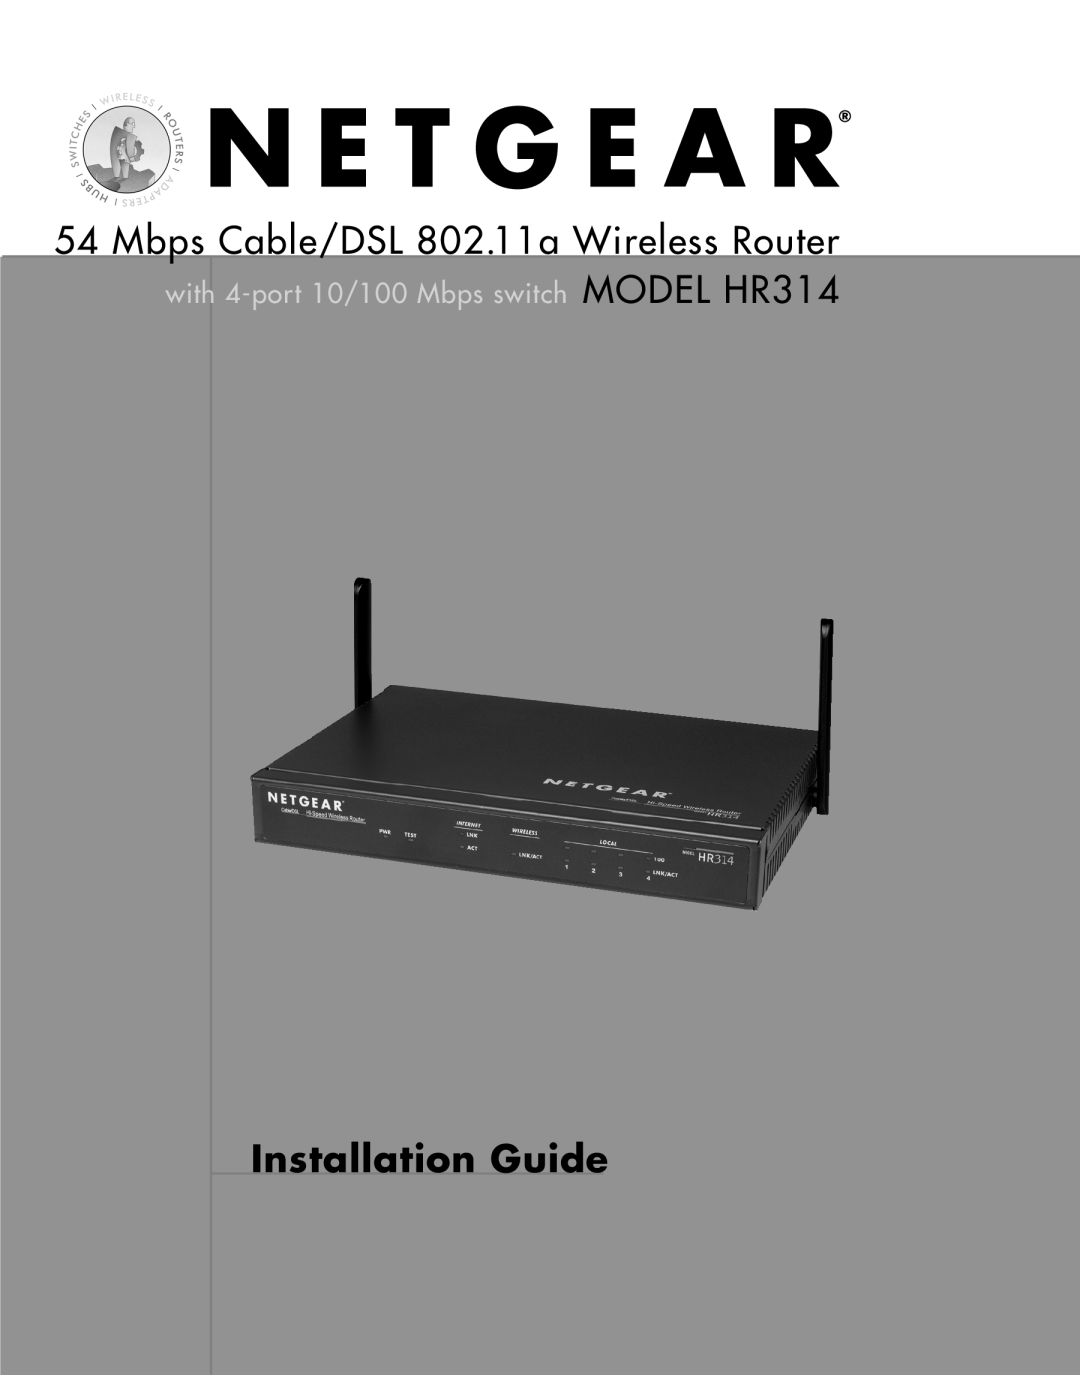 NETGEAR HR314 manual Mbps Cable/DSL 802.11a Wireless Router, Installation Guide 